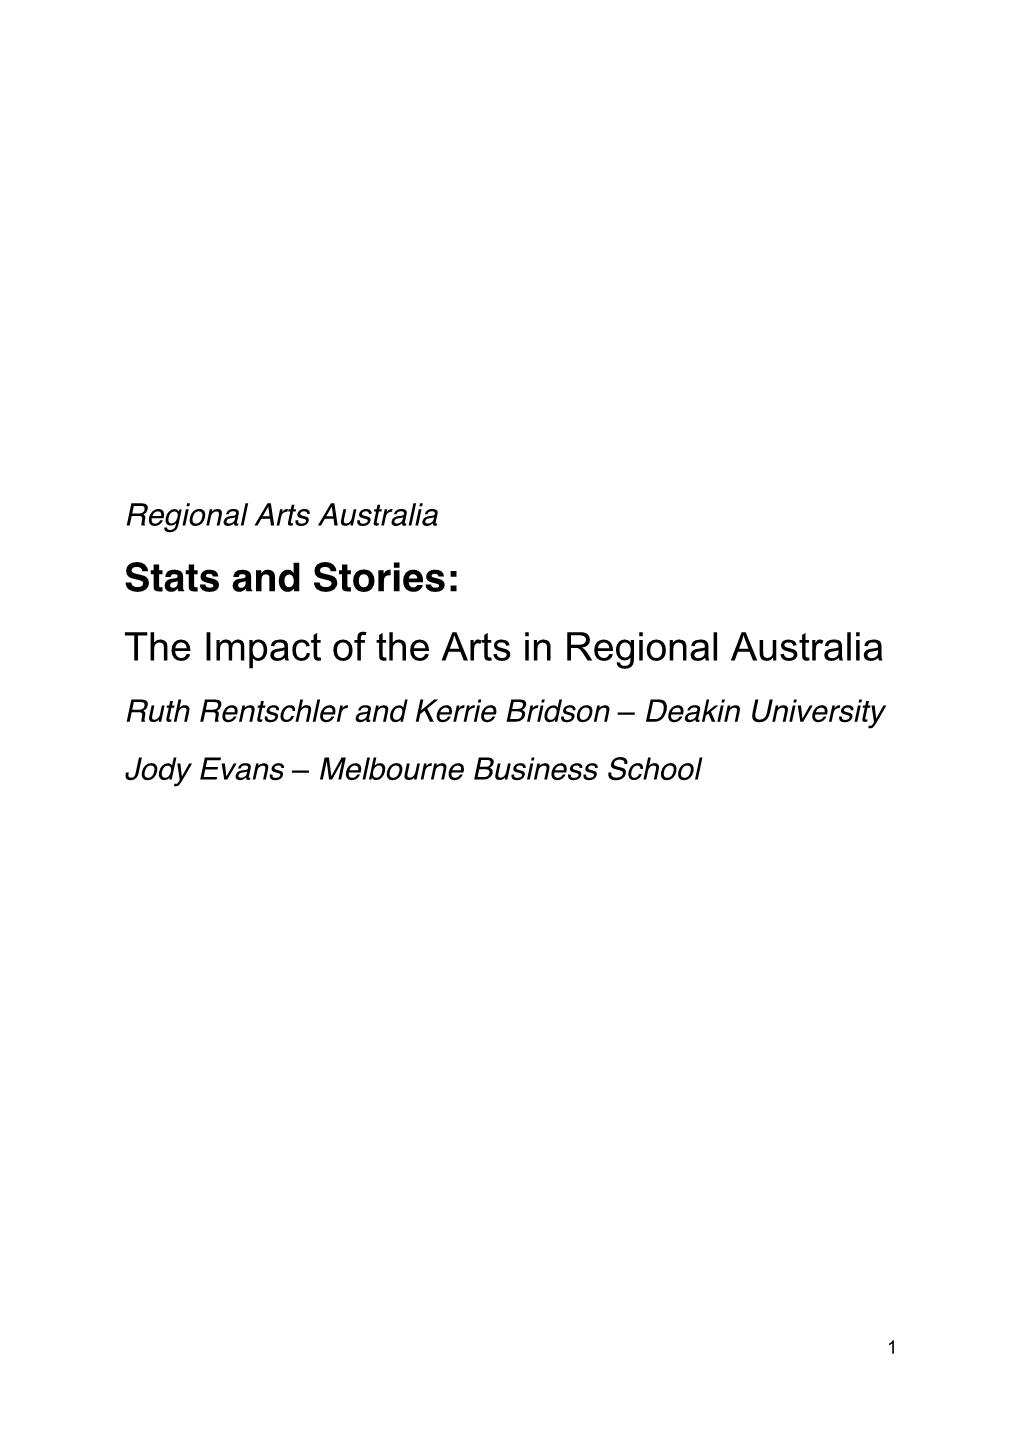 Stats and Stories: the Impact of the Arts in Regional Australia Ruth Rentschler and Kerrie Bridson – Deakin University Jody Evans – Melbourne Business School